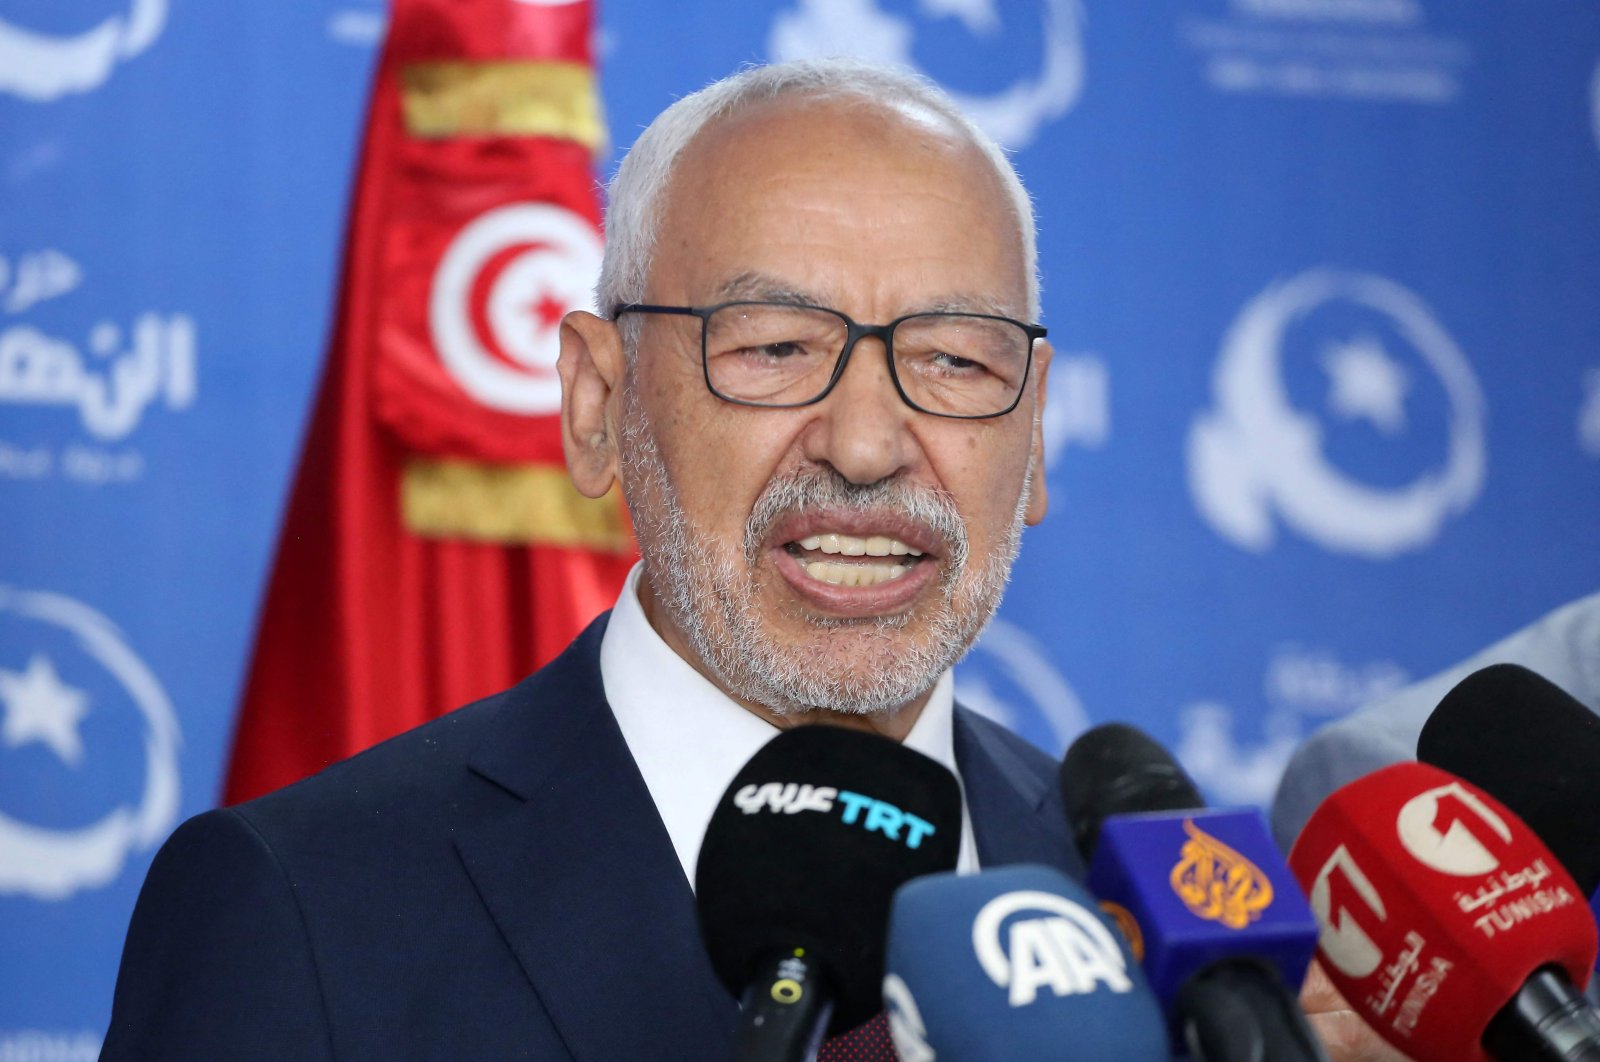 Tunisia's Ghannouchi was discharged from hospital